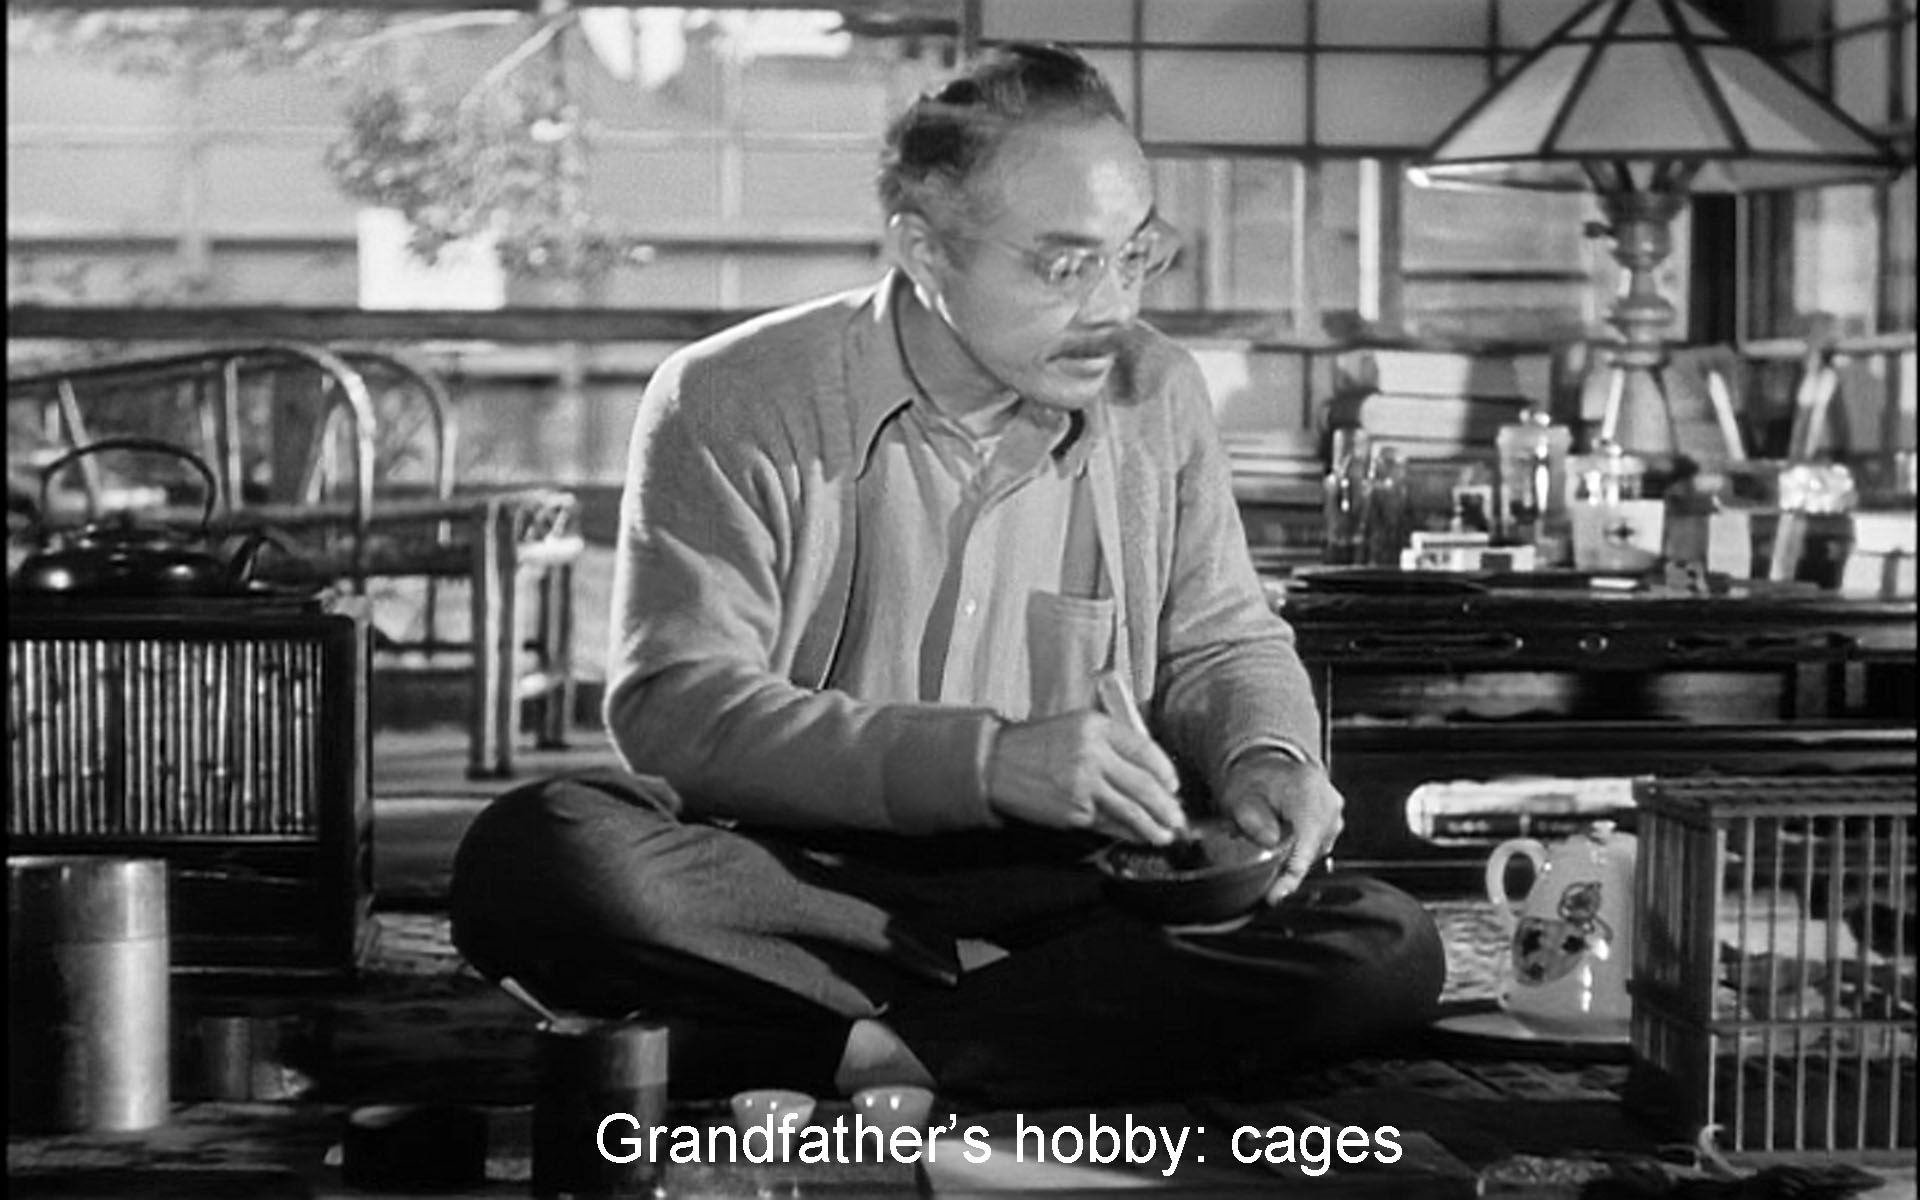 Grandfather's hobby: cages